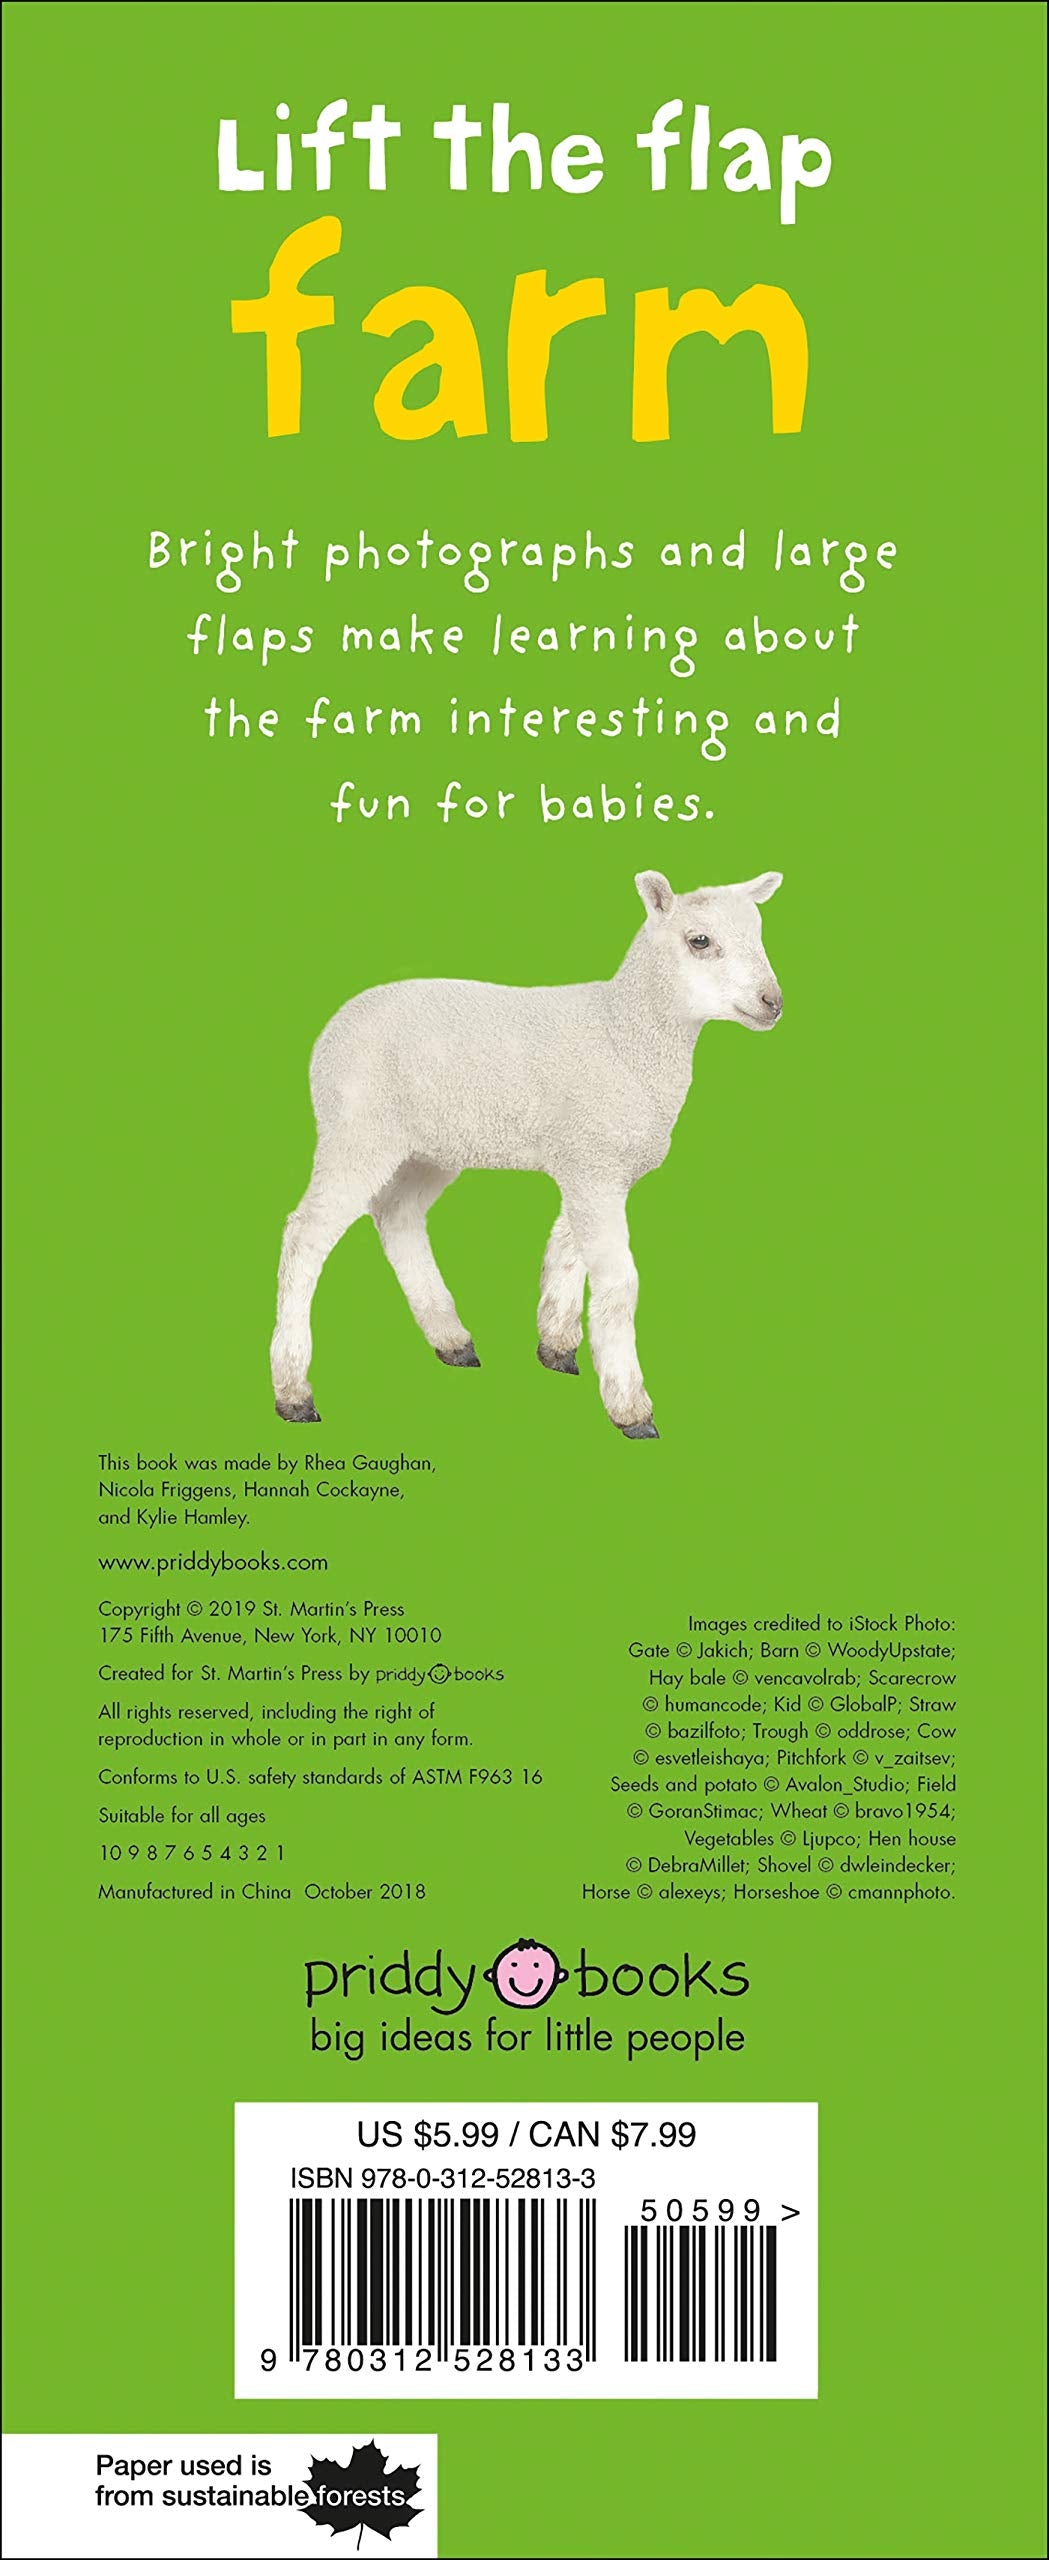 Priddy Baby books: Lift-The-Flap Farm